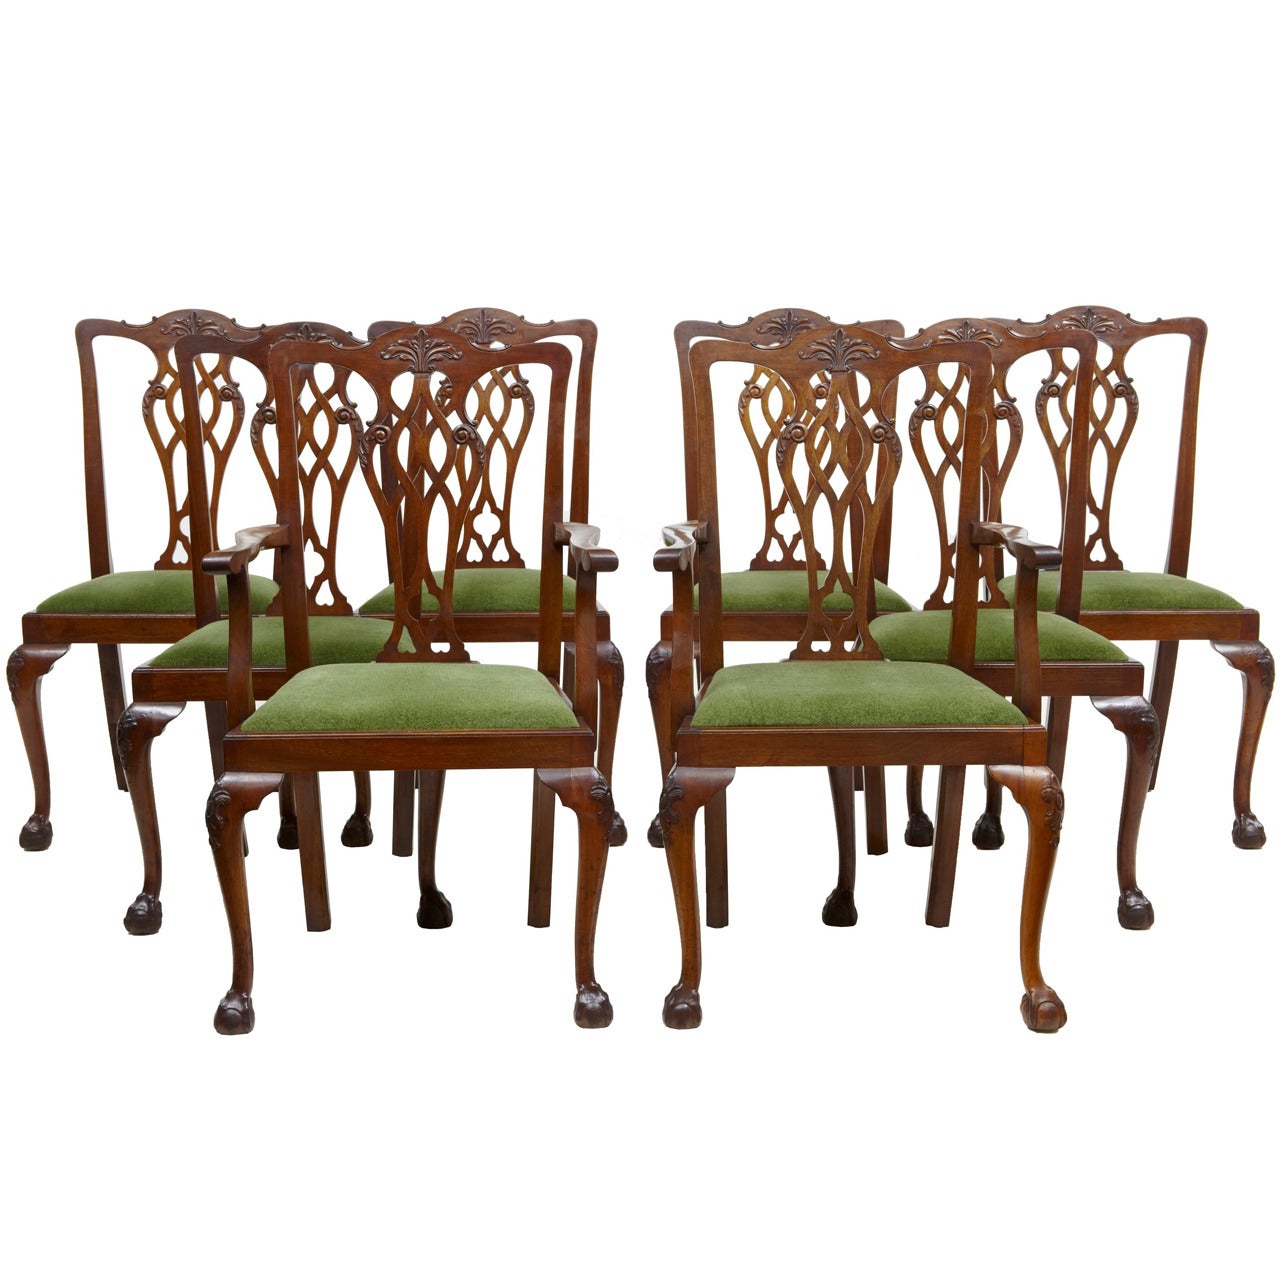 Late 19th Century Set of Ten Chippendale Influenced Mahogany Dining Chairs